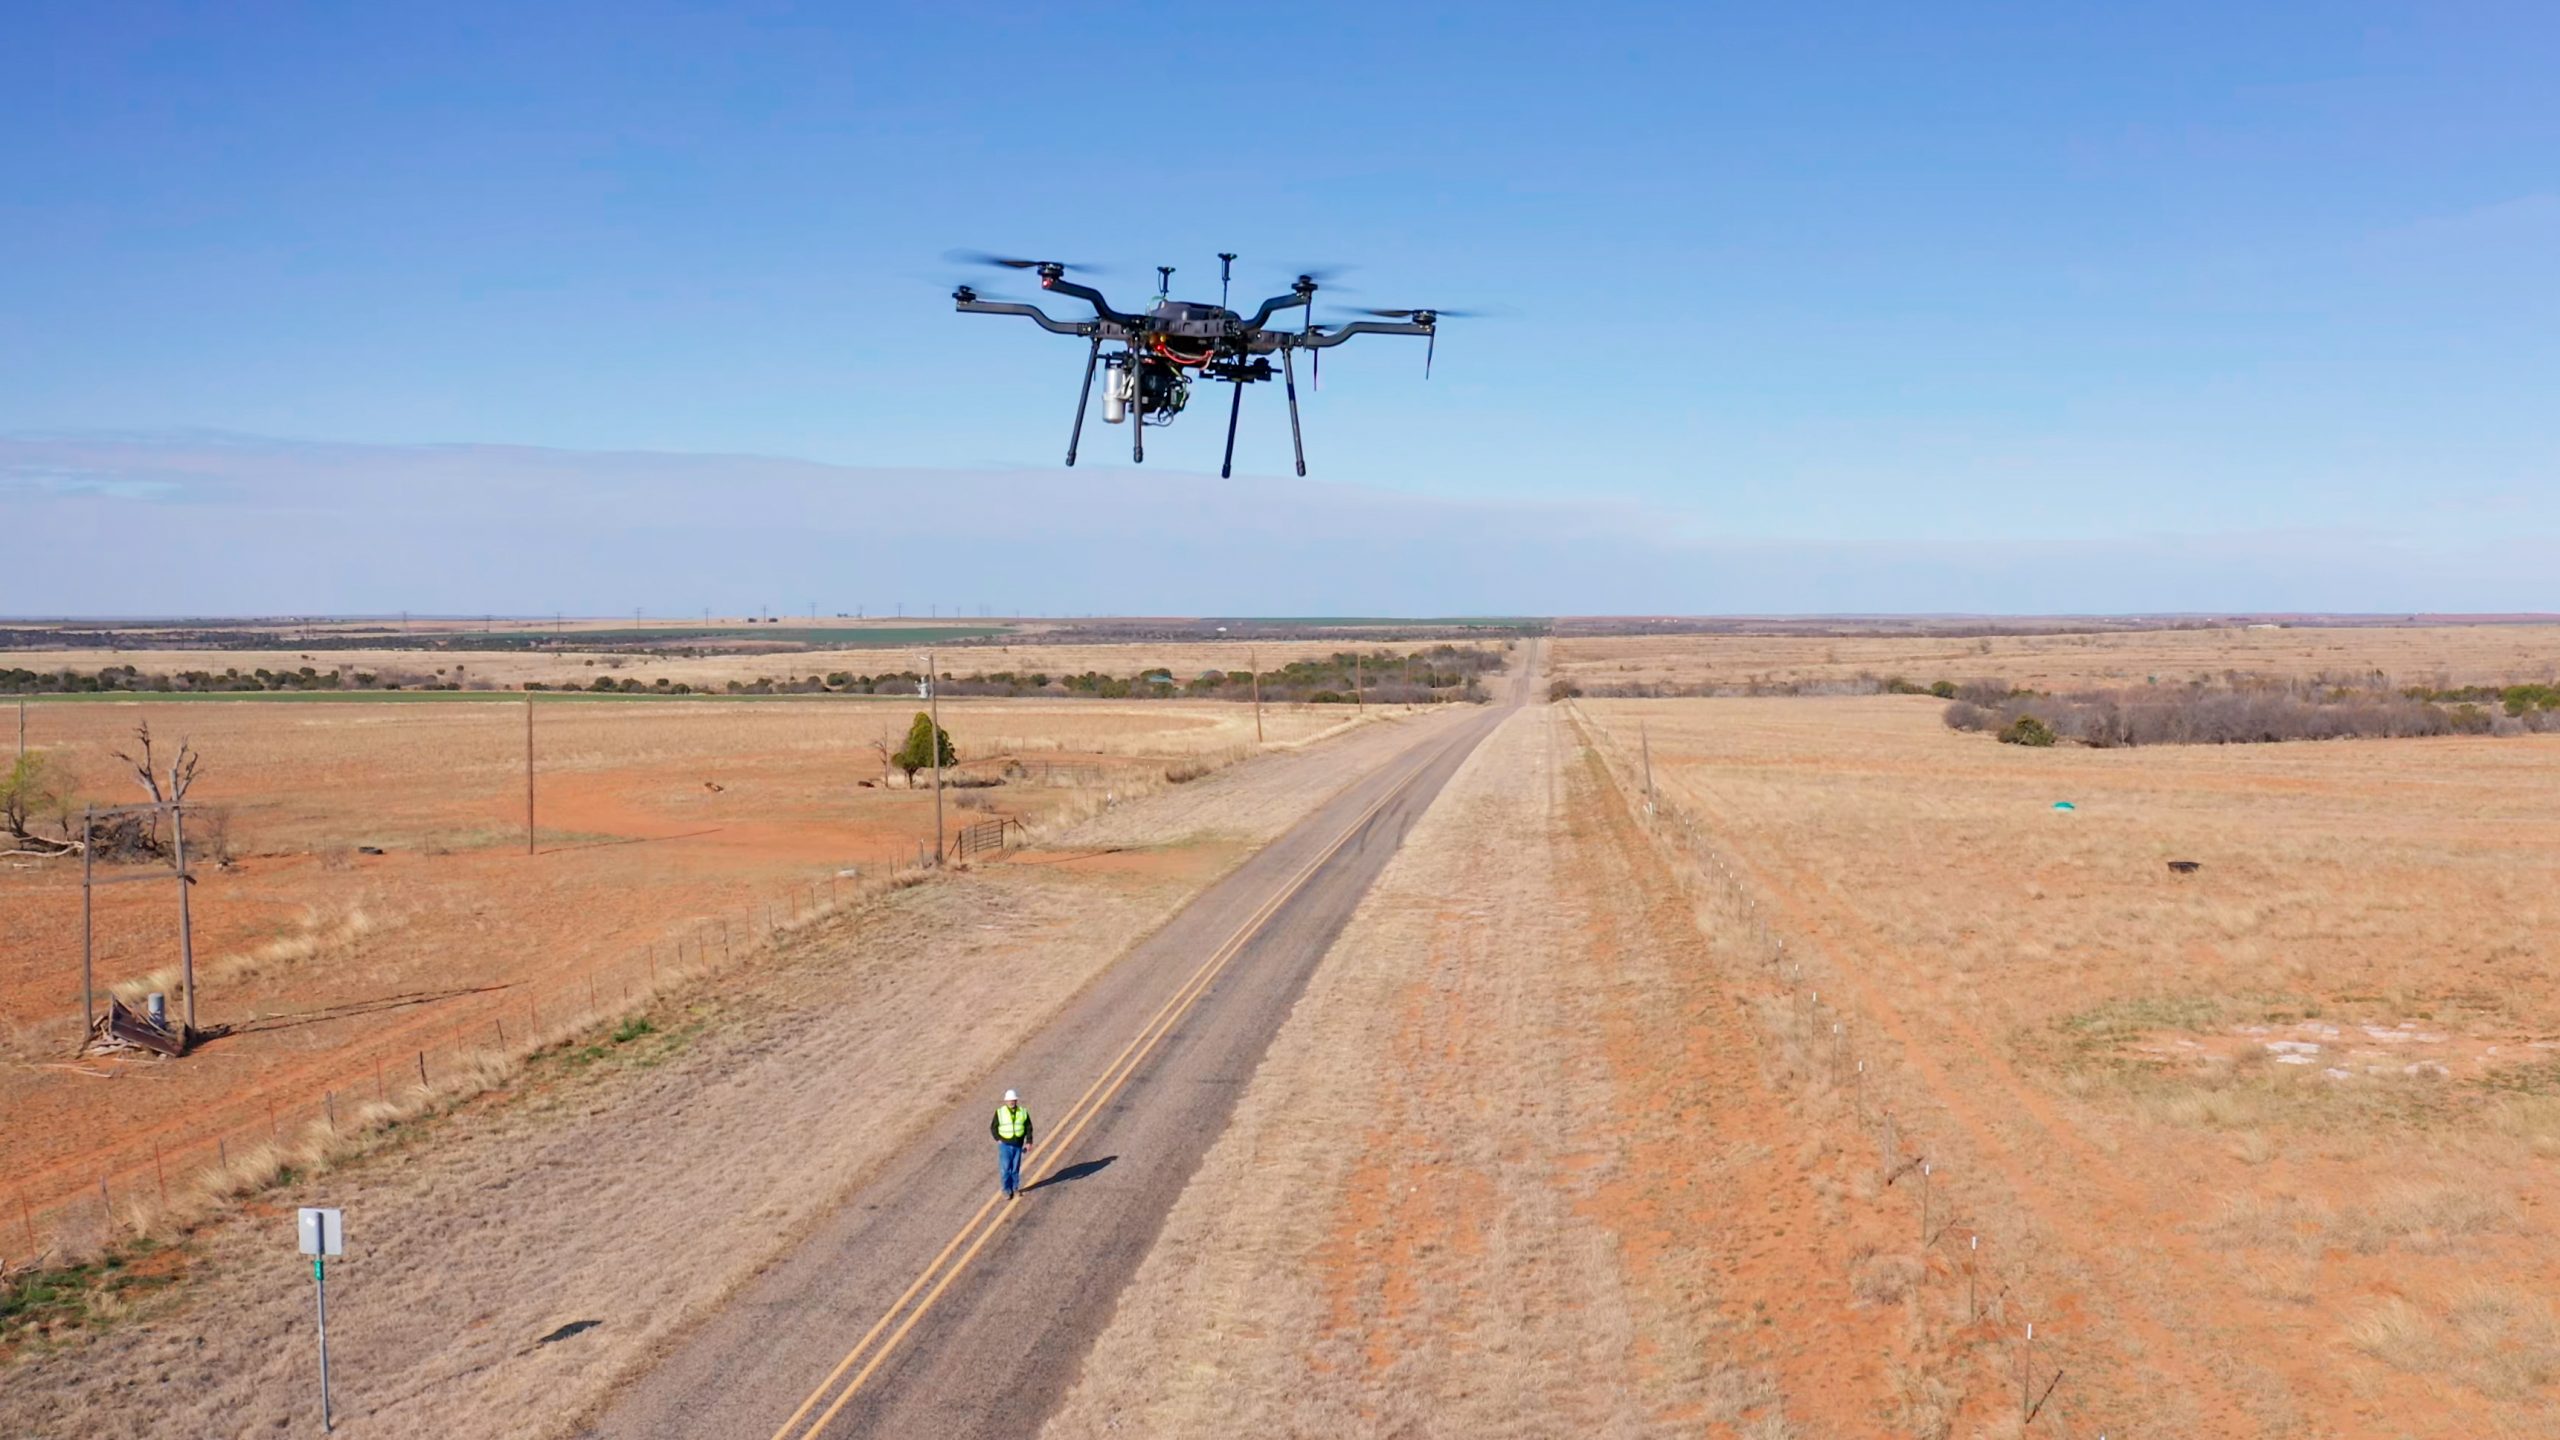 Valmont 77 mile project. A 77 mile drone flight from Childreess, TX to Paducah, TX to commemorate Valmont's 77 year anniversary.